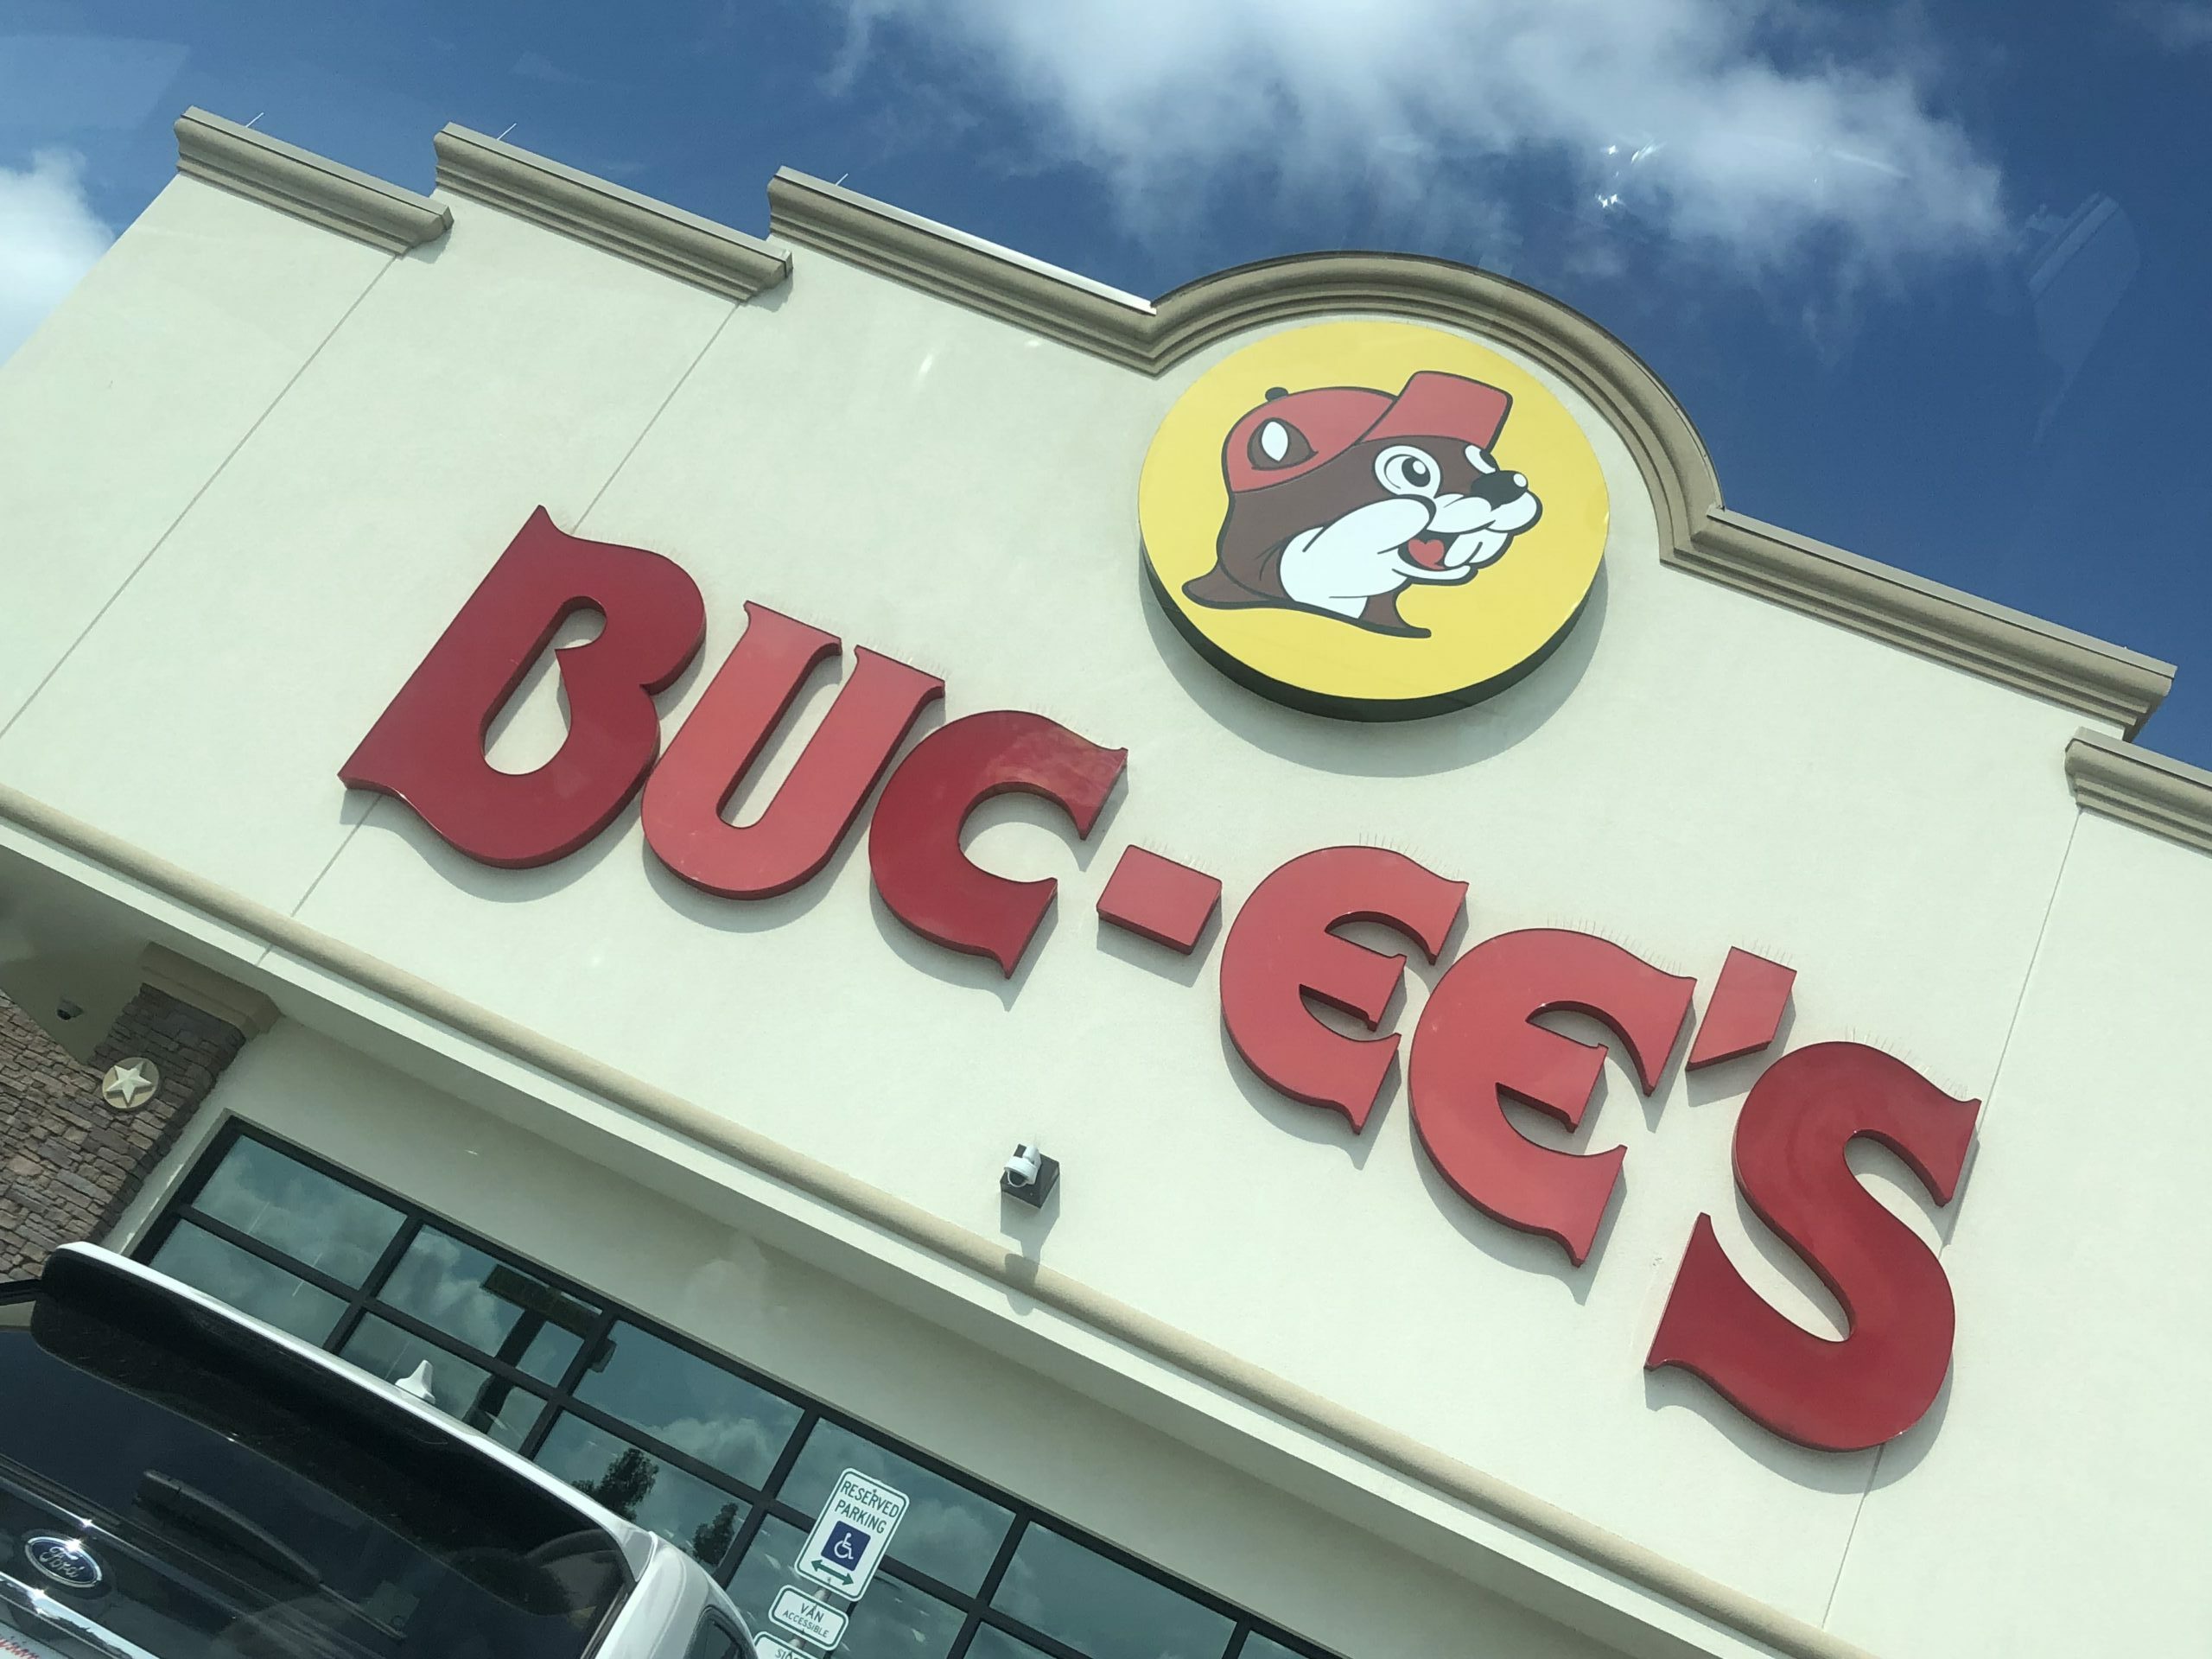 you either love Buc-ee's or you hate it.